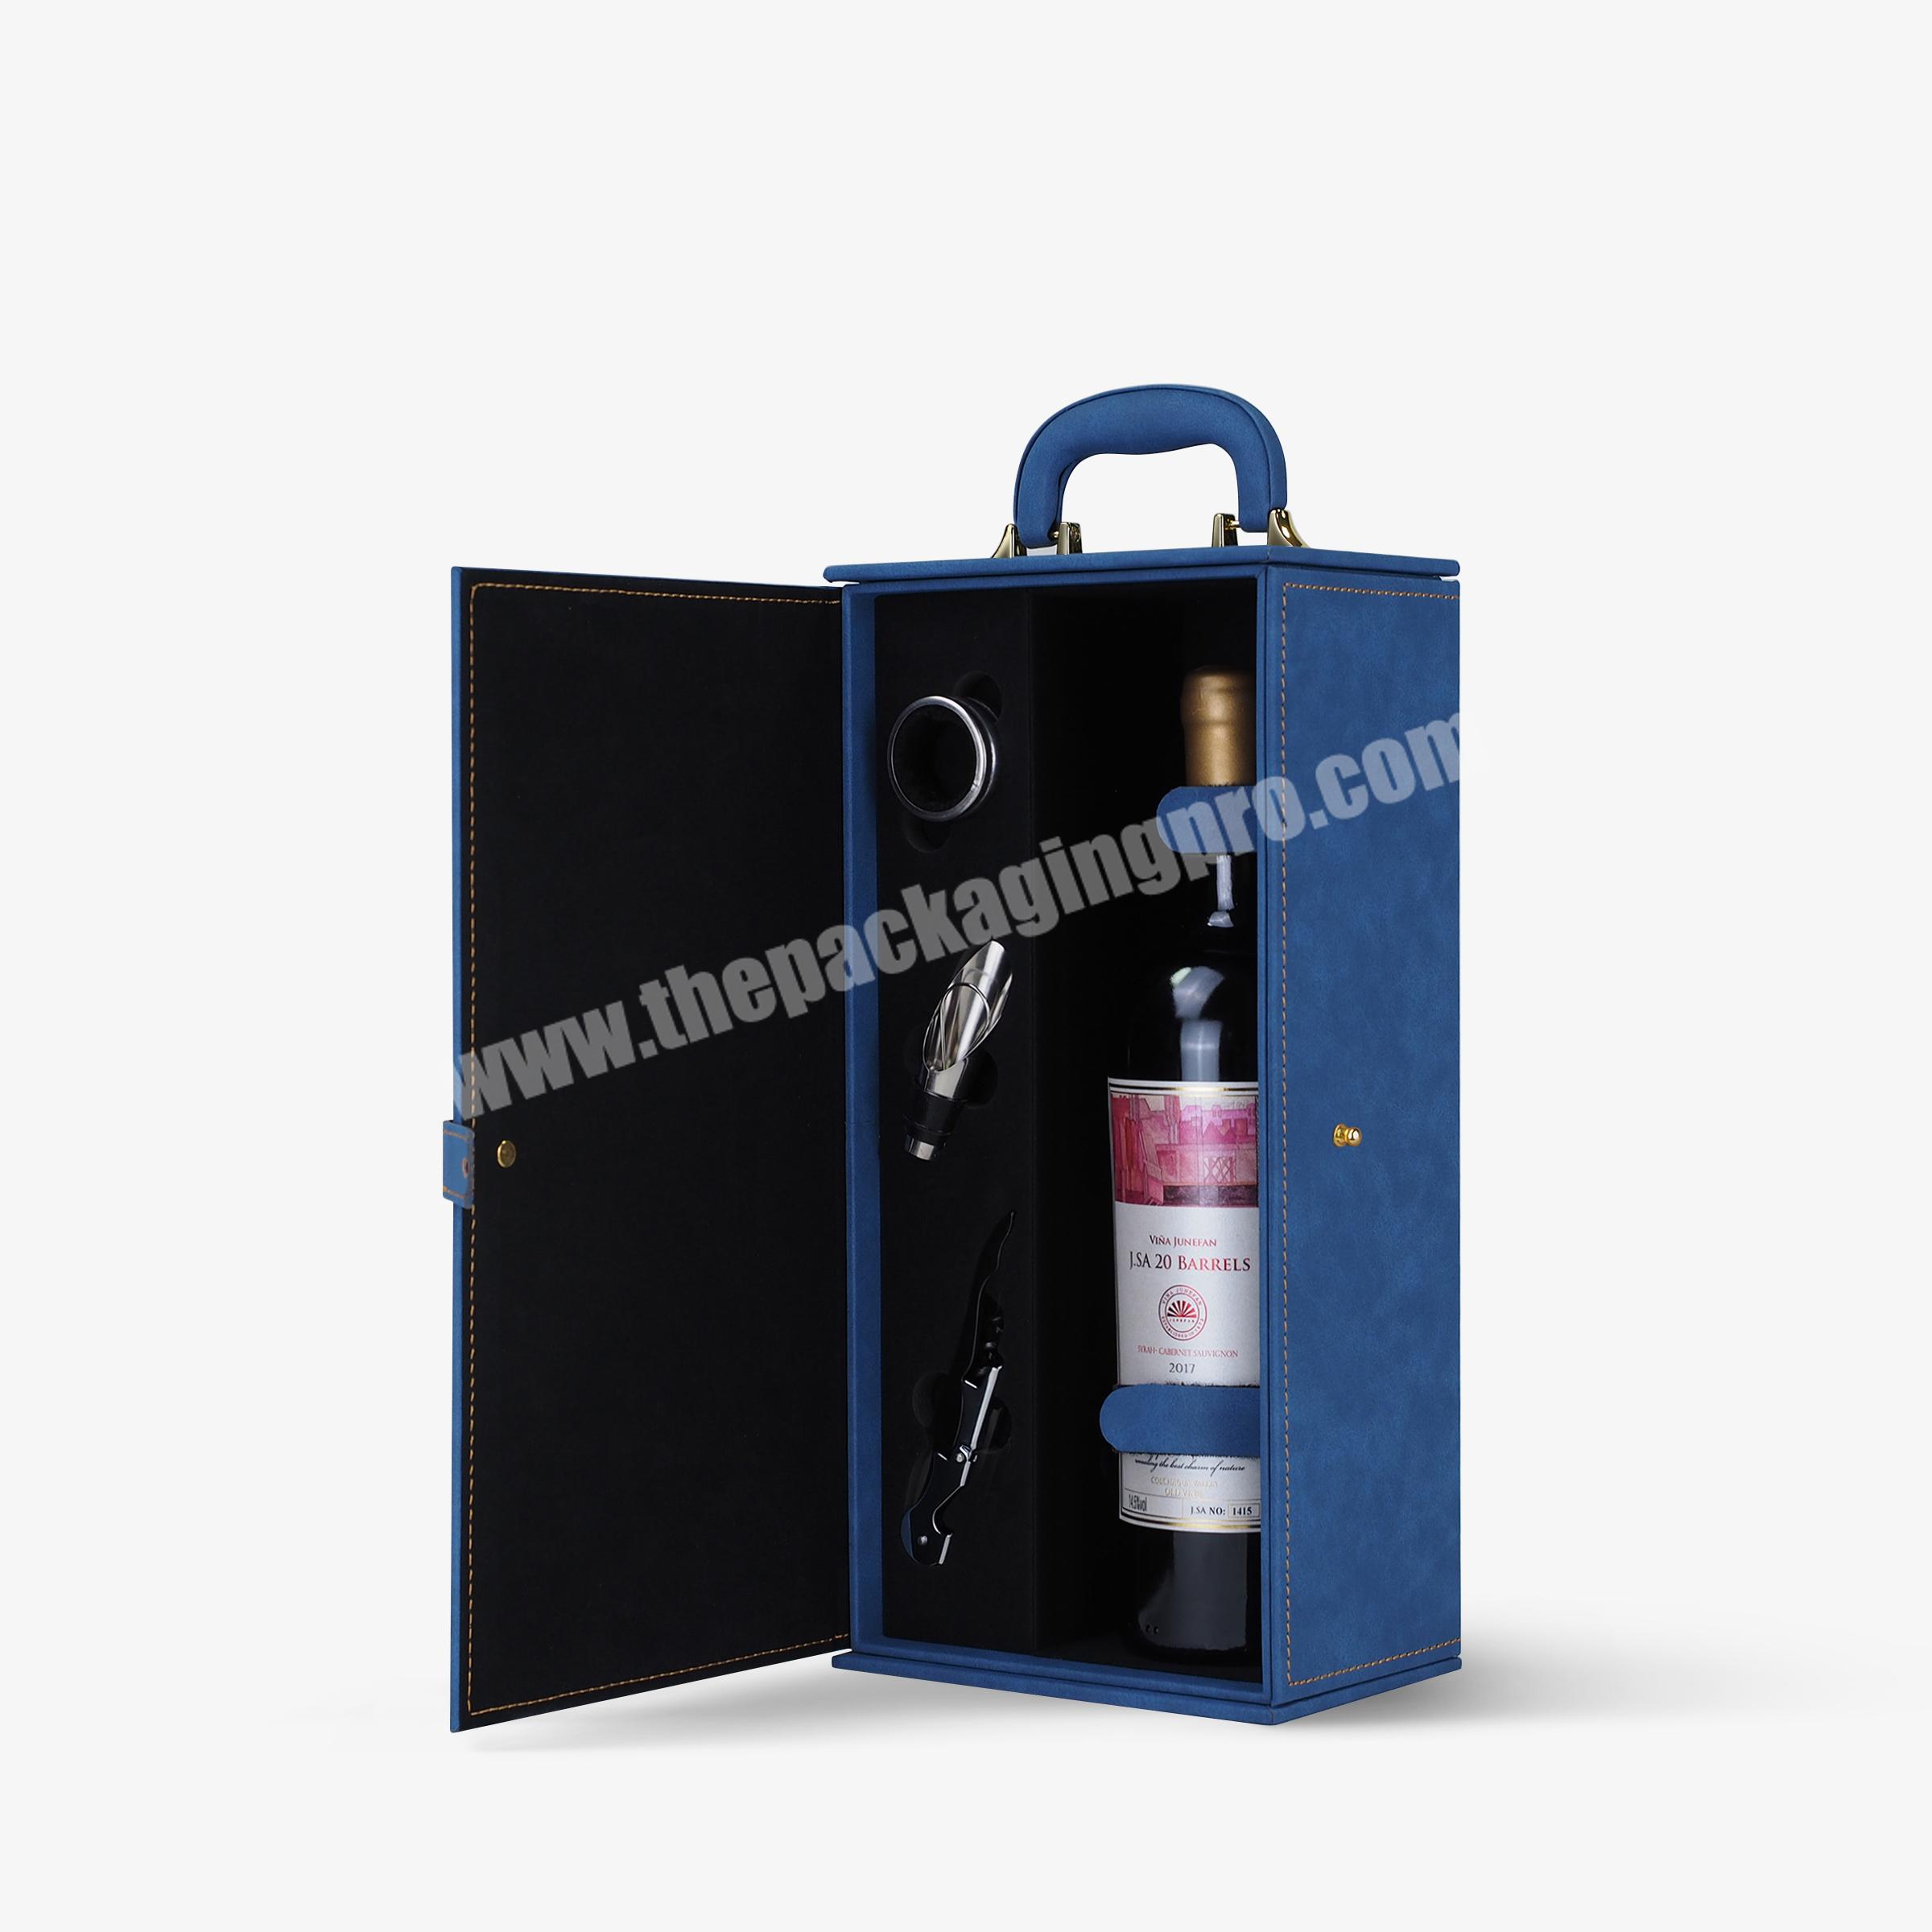 Hot sale gift boxes for wine deluxe wine box wine packaging boxes manufacturer